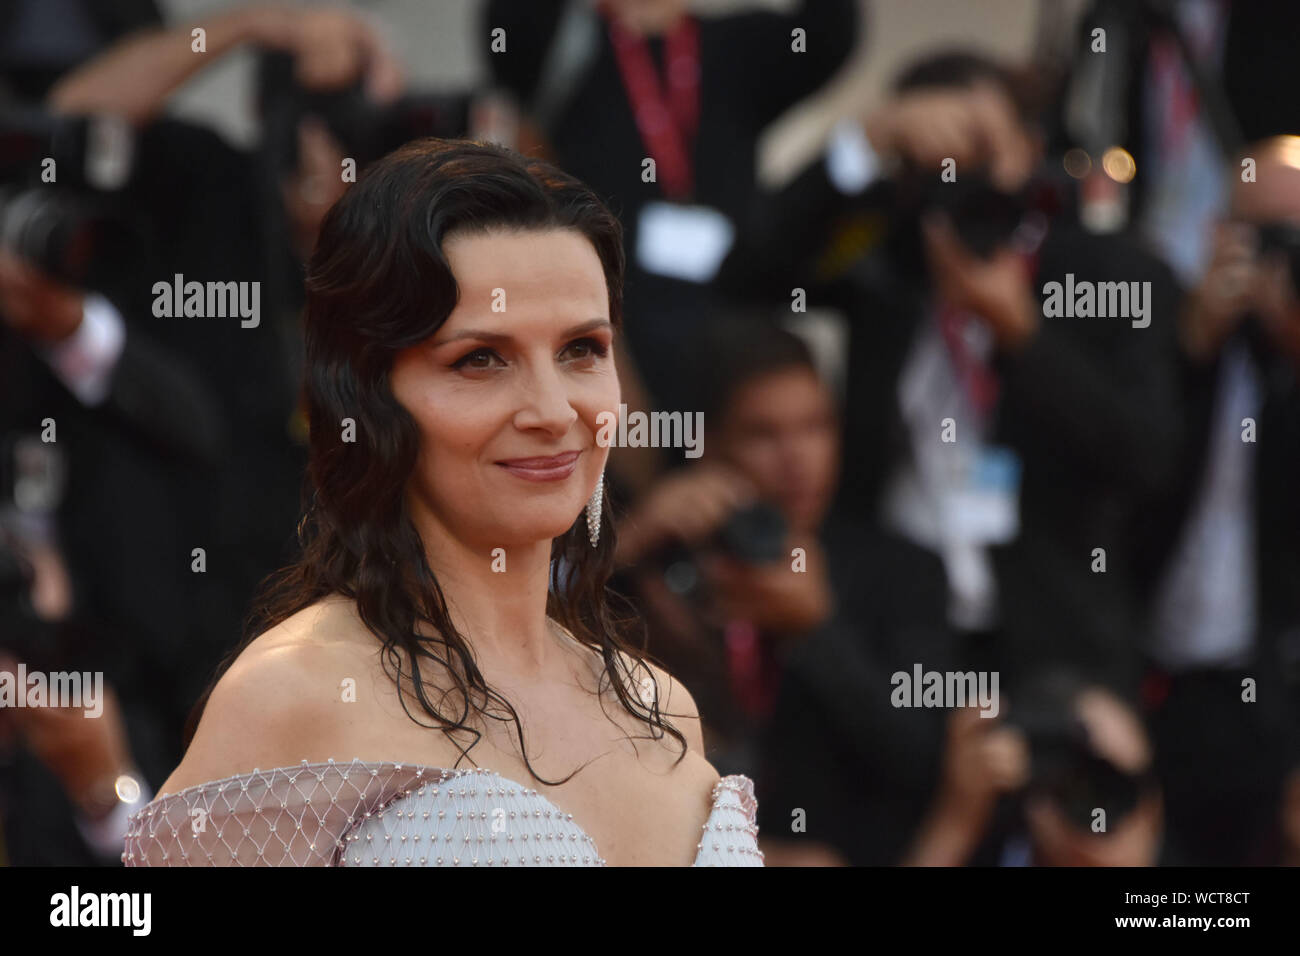 VENICE, Italy. 28th Aug, 2019. Juliette Binoche walks the red carpet ahead of the opening ceremony during the 76th Venice Film Festival at Sala Casino on August 28, 2019 in Venice, Italy. Credit: Andrea Merola/Awakening/Alamy Live News Stock Photo